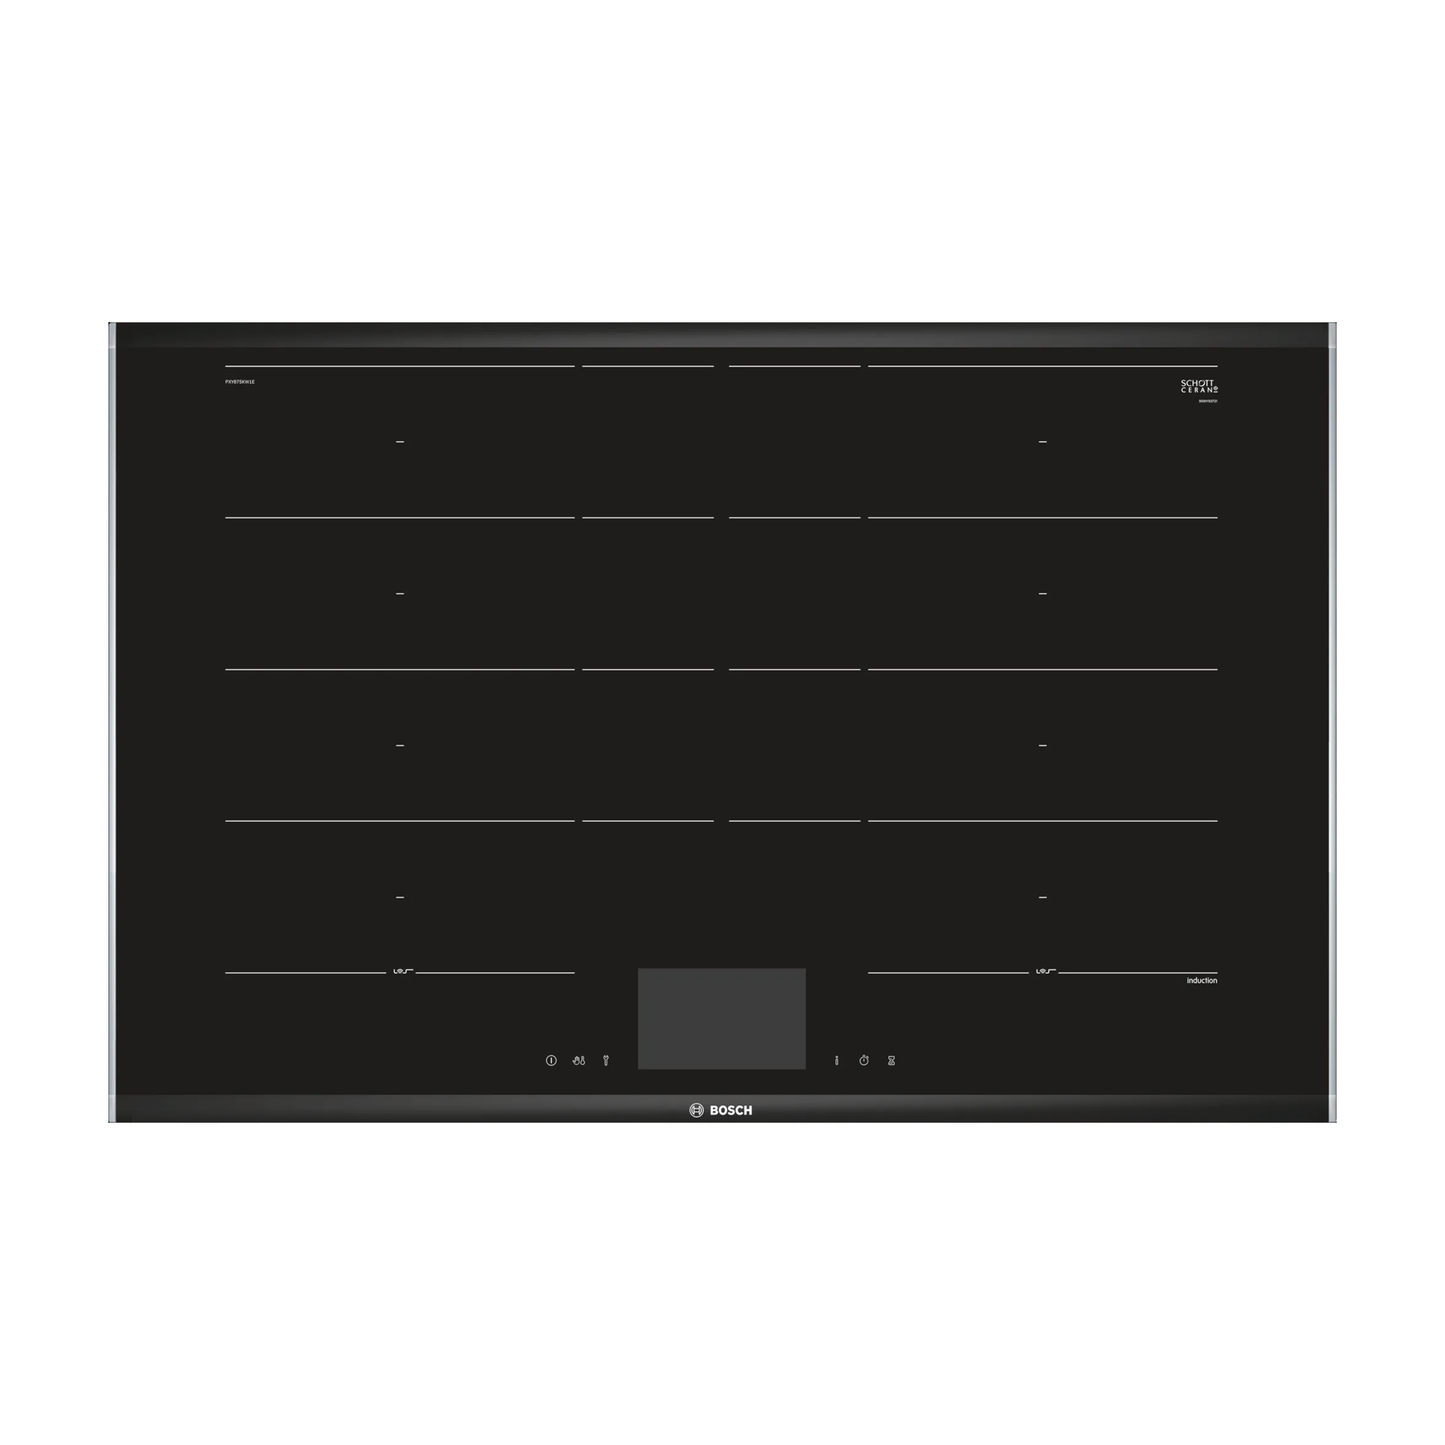 BOSCH PXY875KW1E 800mm Induction Hob with automatic temperature control 博西 全區電磁灶 連電動溫度控制功能  | 嵌入式 | 廚房電器 | 家電 |